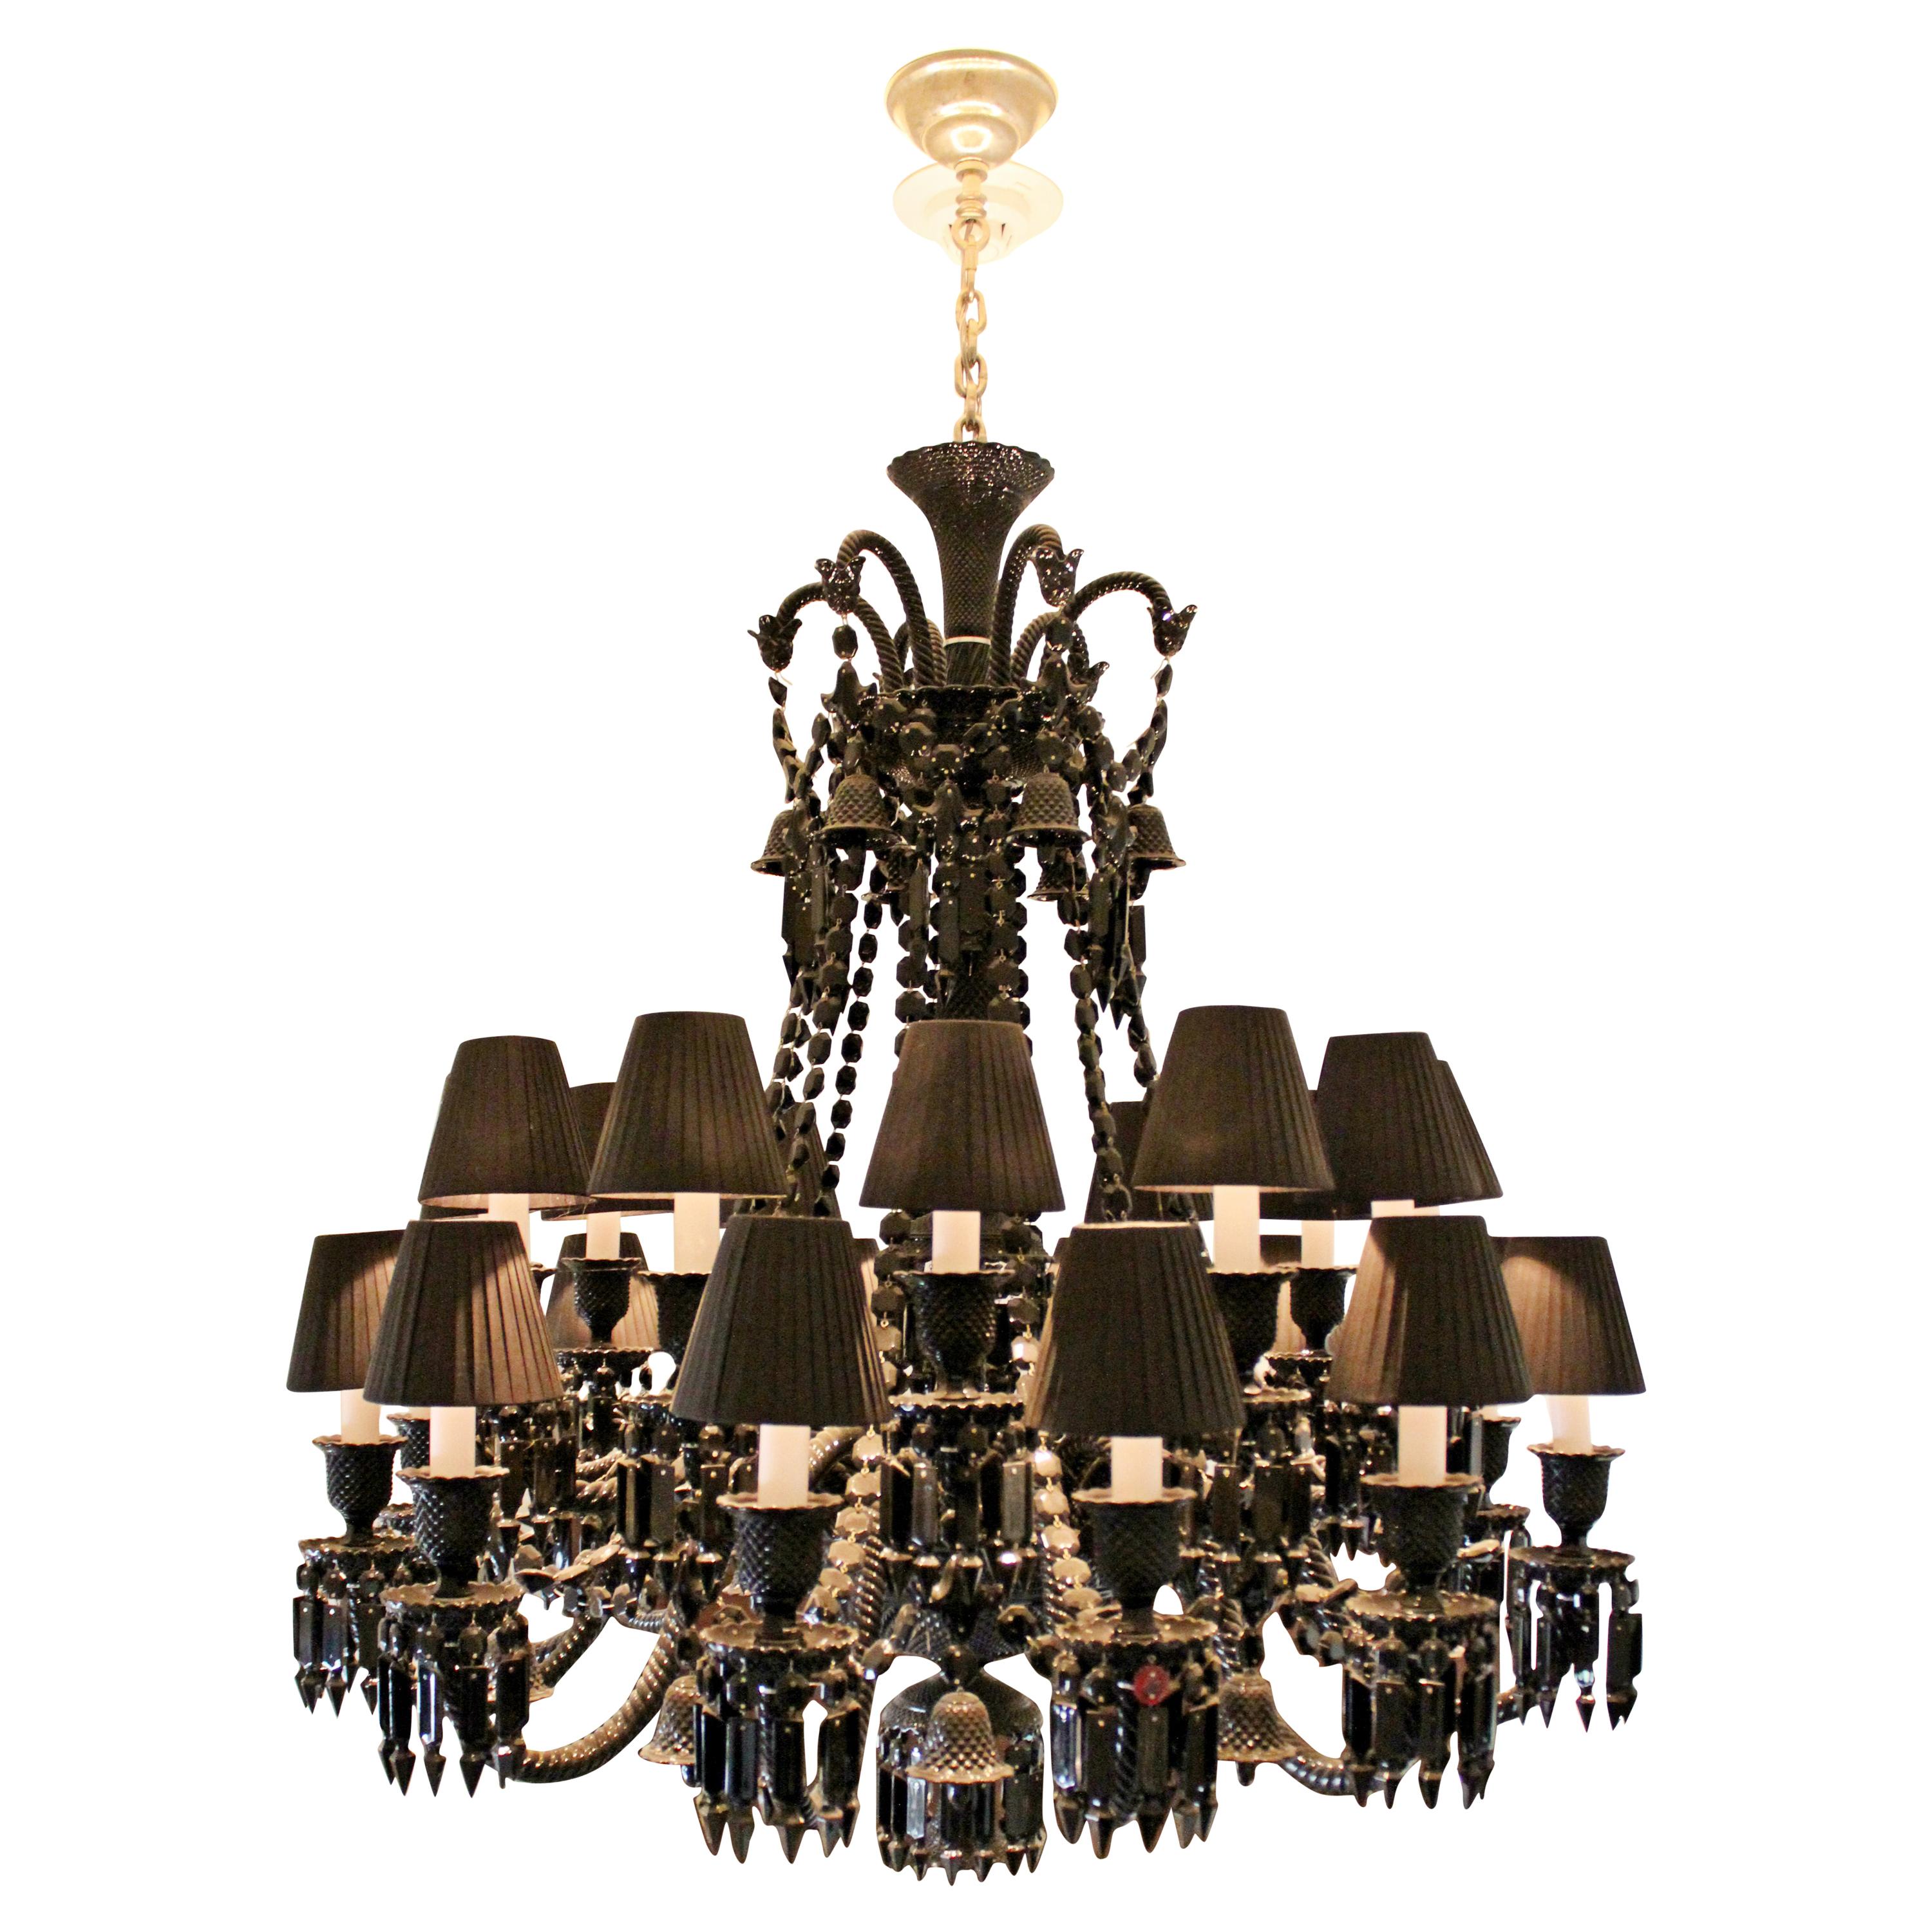 Contemporary Baccarat Zenith Black Crystal Noir Chandelier by Philippe Starck